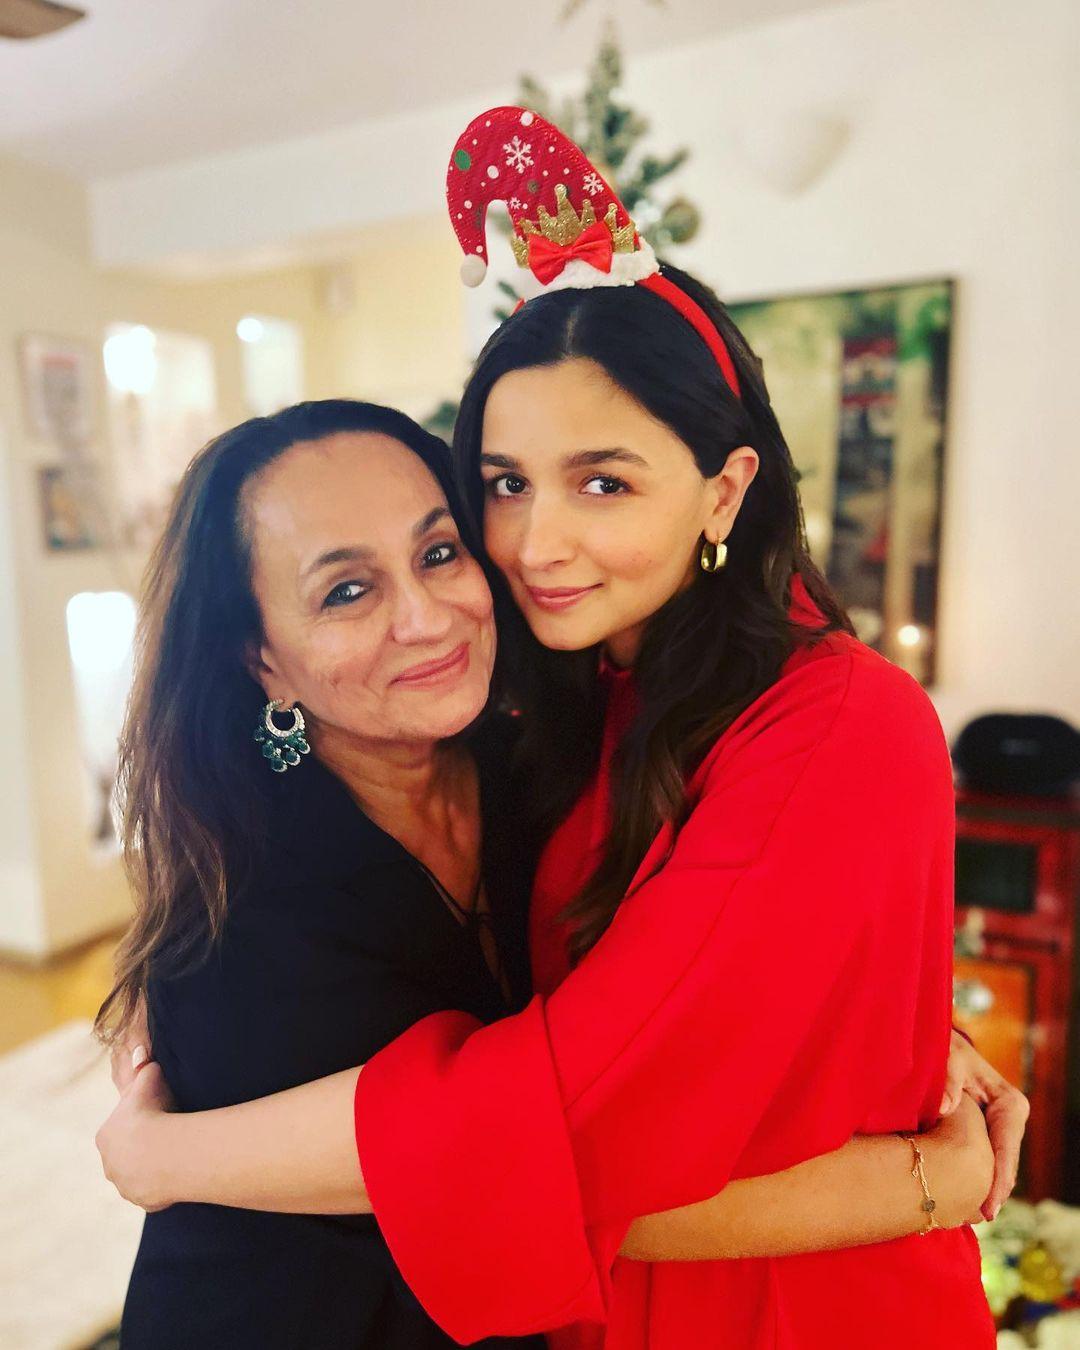 Alia Bhatt and her mom Soni Razdan are known for their close relationship. Soni, an actress herself, has been a pillar of support for Alia's Bollywood career. 